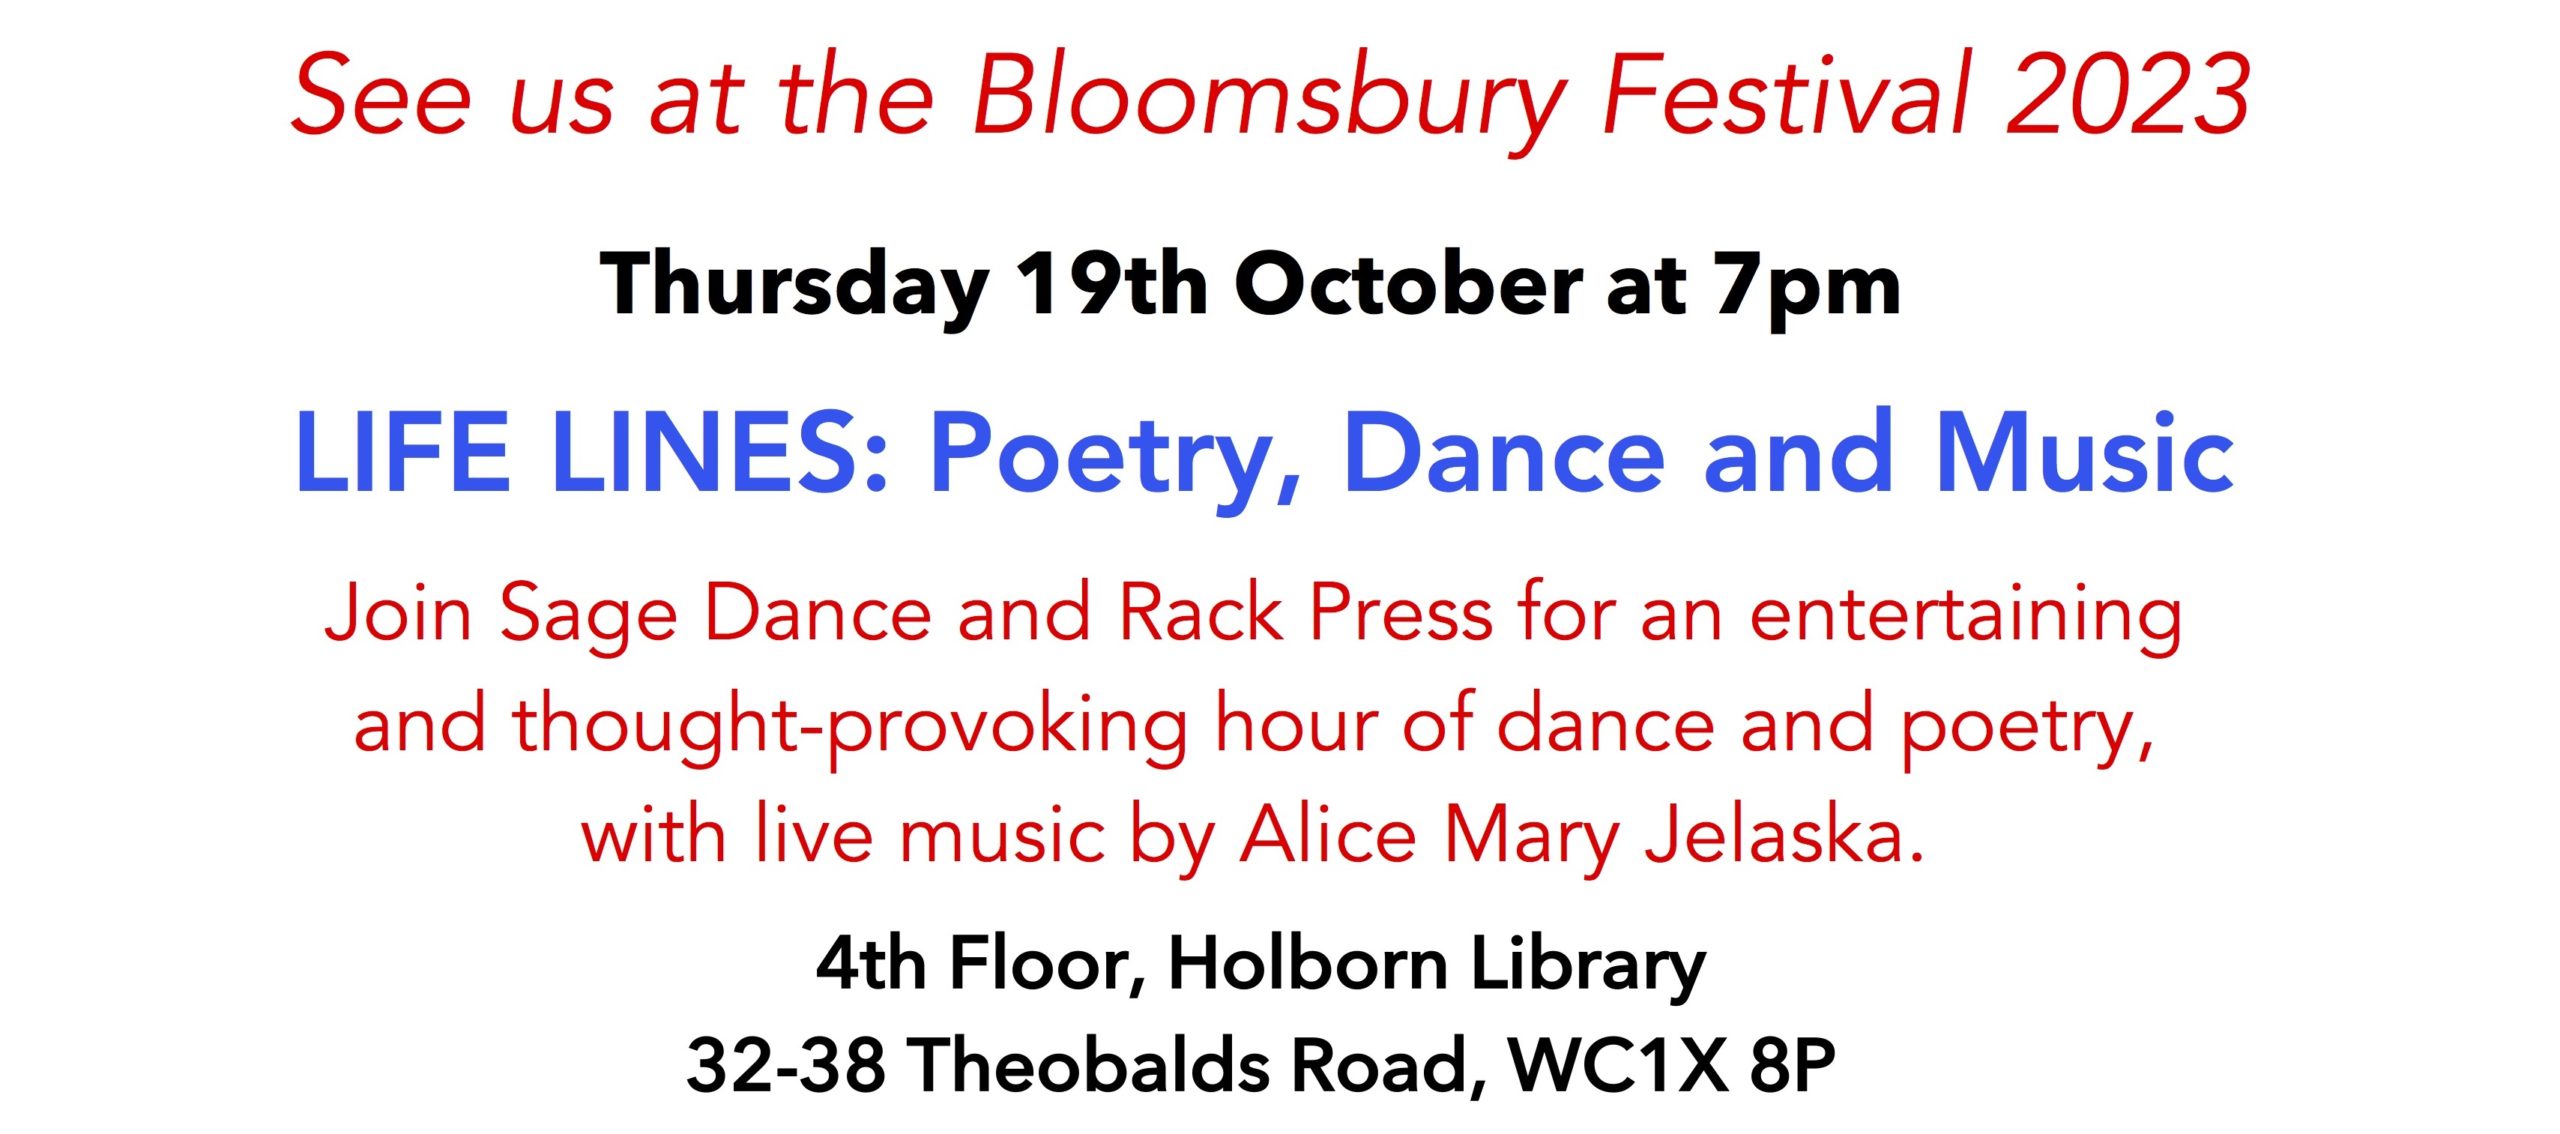 Tickets: £10 (£8) Eventbrite - www.eventbrite.co.uk/e/life-lines-poetry-dance-and-music-tickets-660377465777